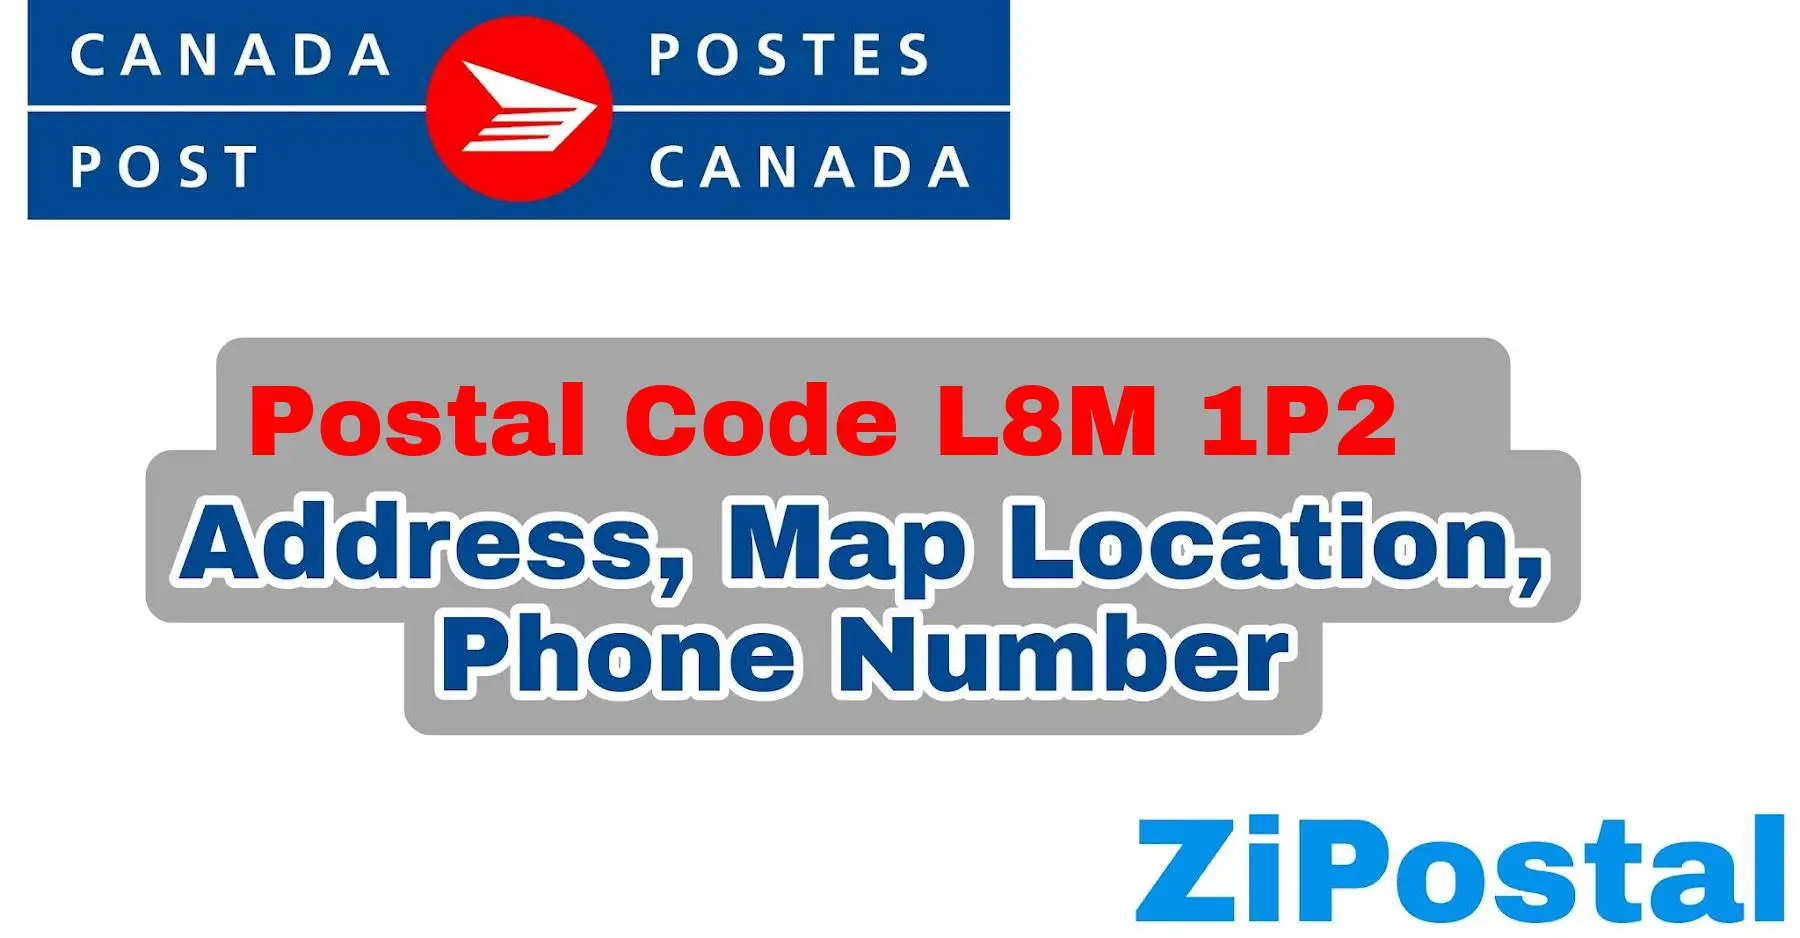 Postal Code L8M 1P2 Address Map Location and Phone Number